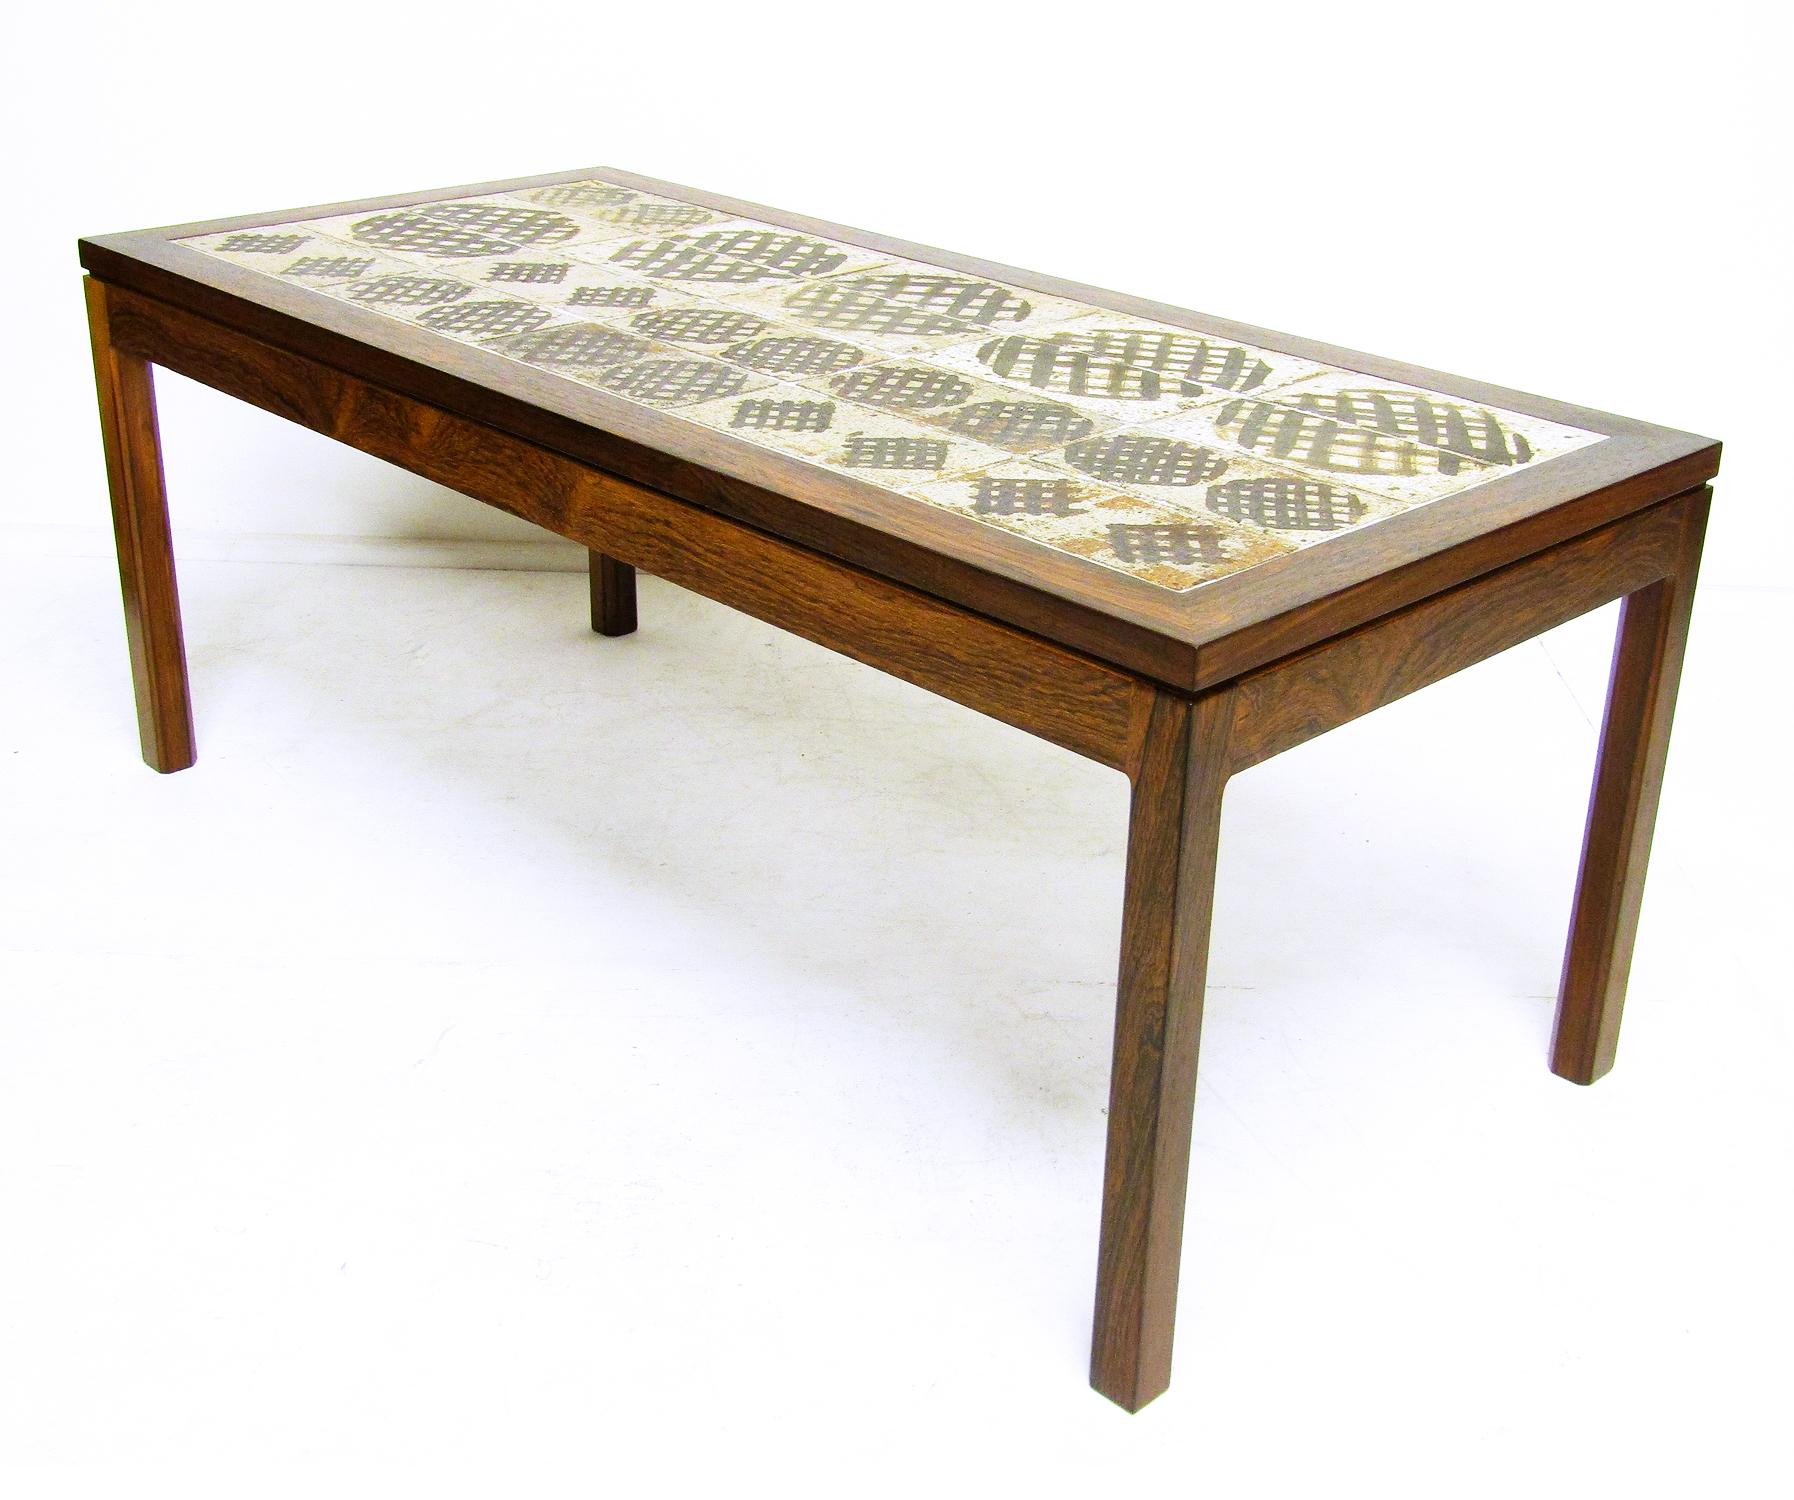 Ceramic Large 1970s Danish Art Tile Coffee Table in Rosewood by Tue Poulsen & Eric Wörtz